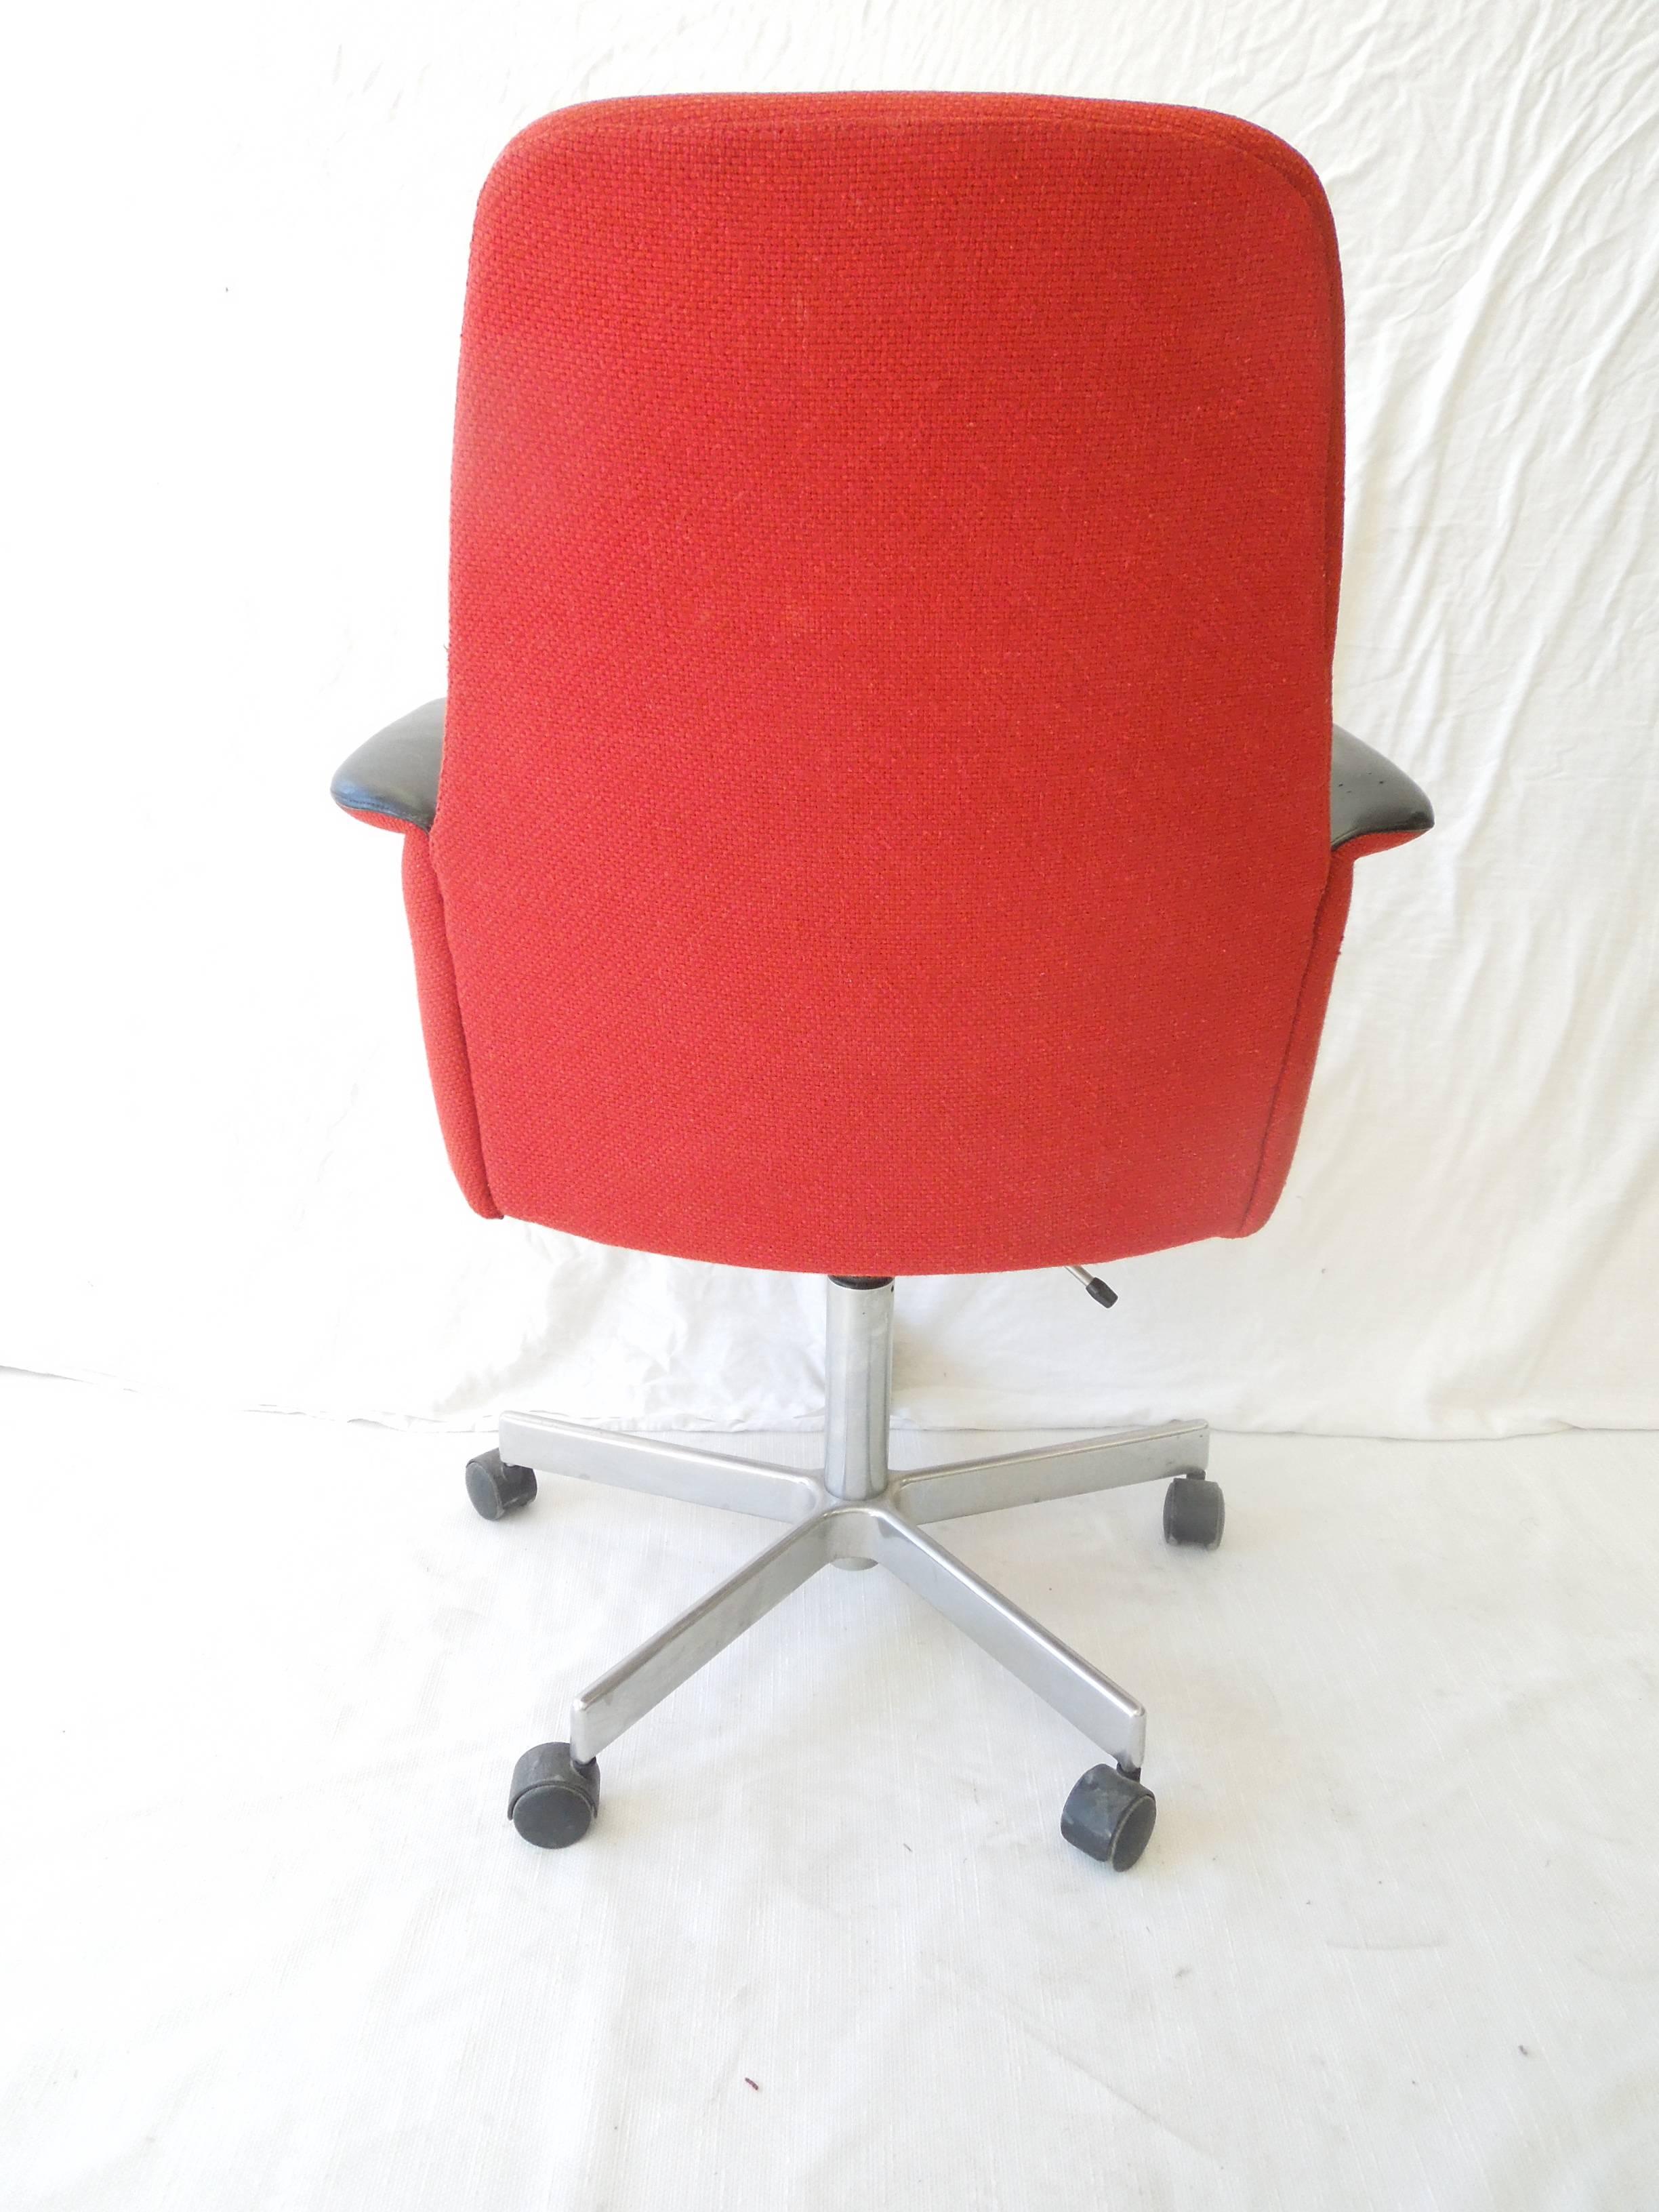 60's office chair